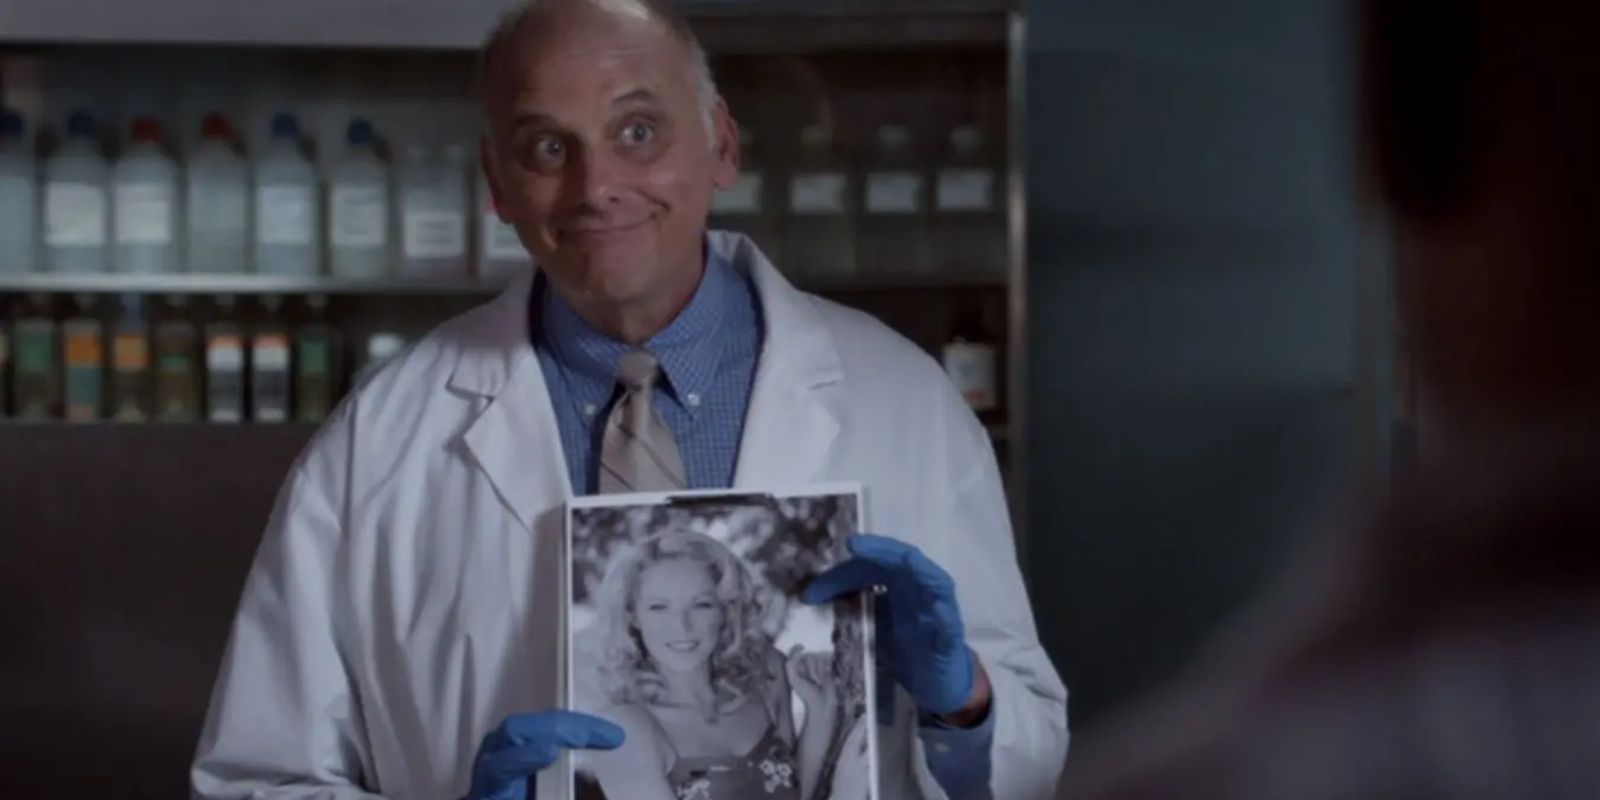 Woody Strode holds up a black and white photo in the morgue in Psych